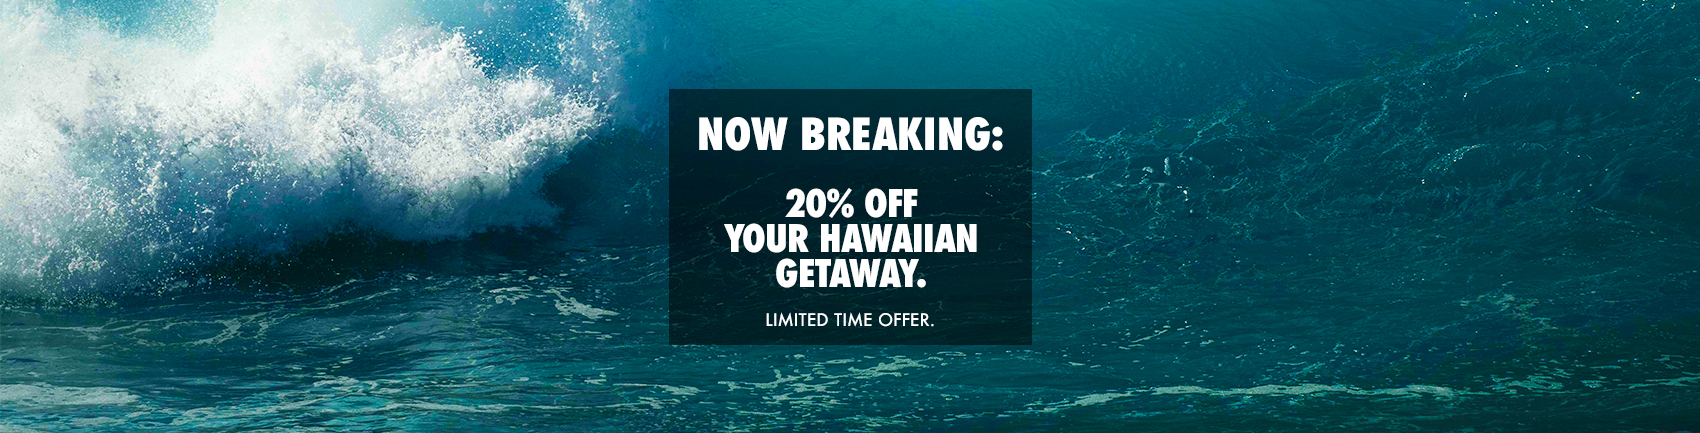 Now Breaking: 20% Off Your Hawaiian Getaway. Limited Time Offer.